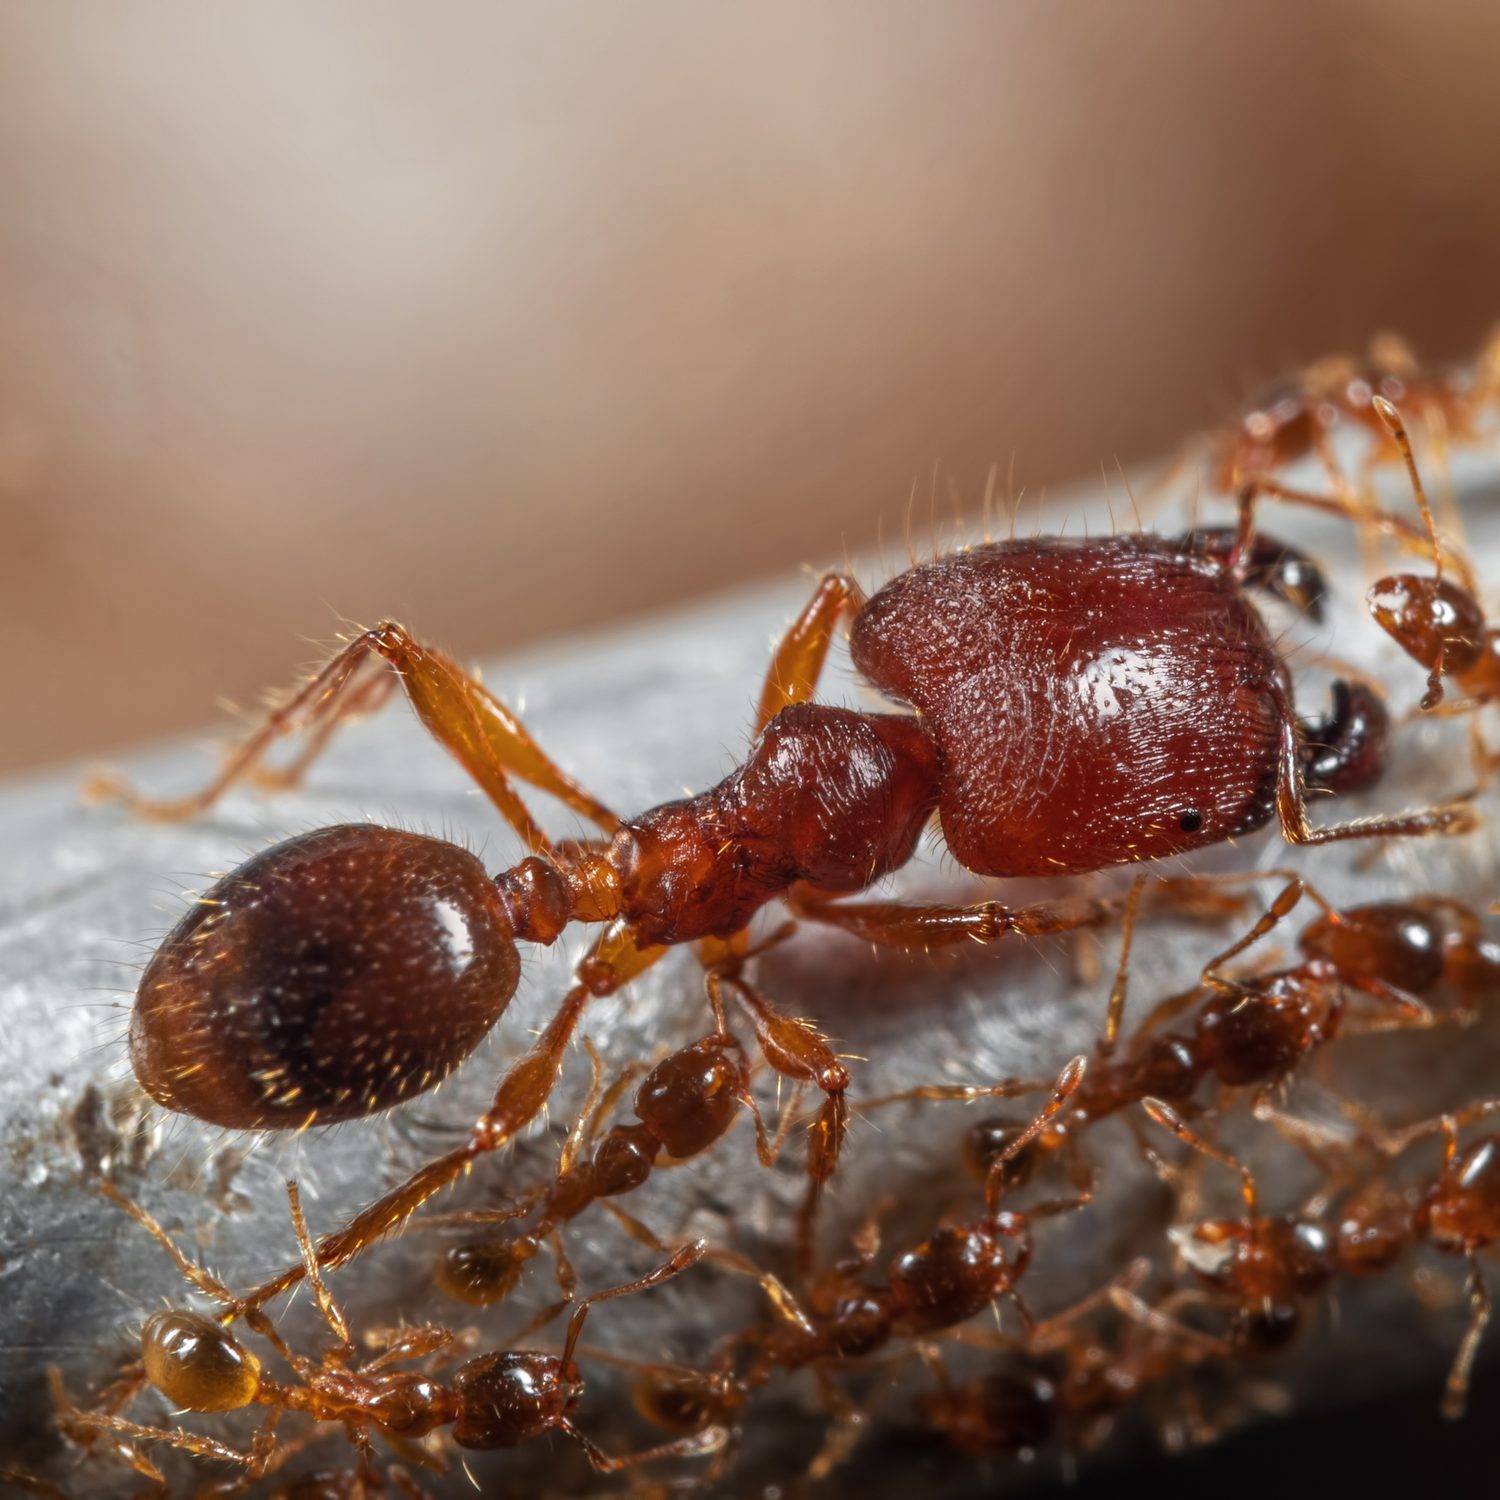 Macro Photo of Soldier Big-Headed Ant with Group of Worker Ants